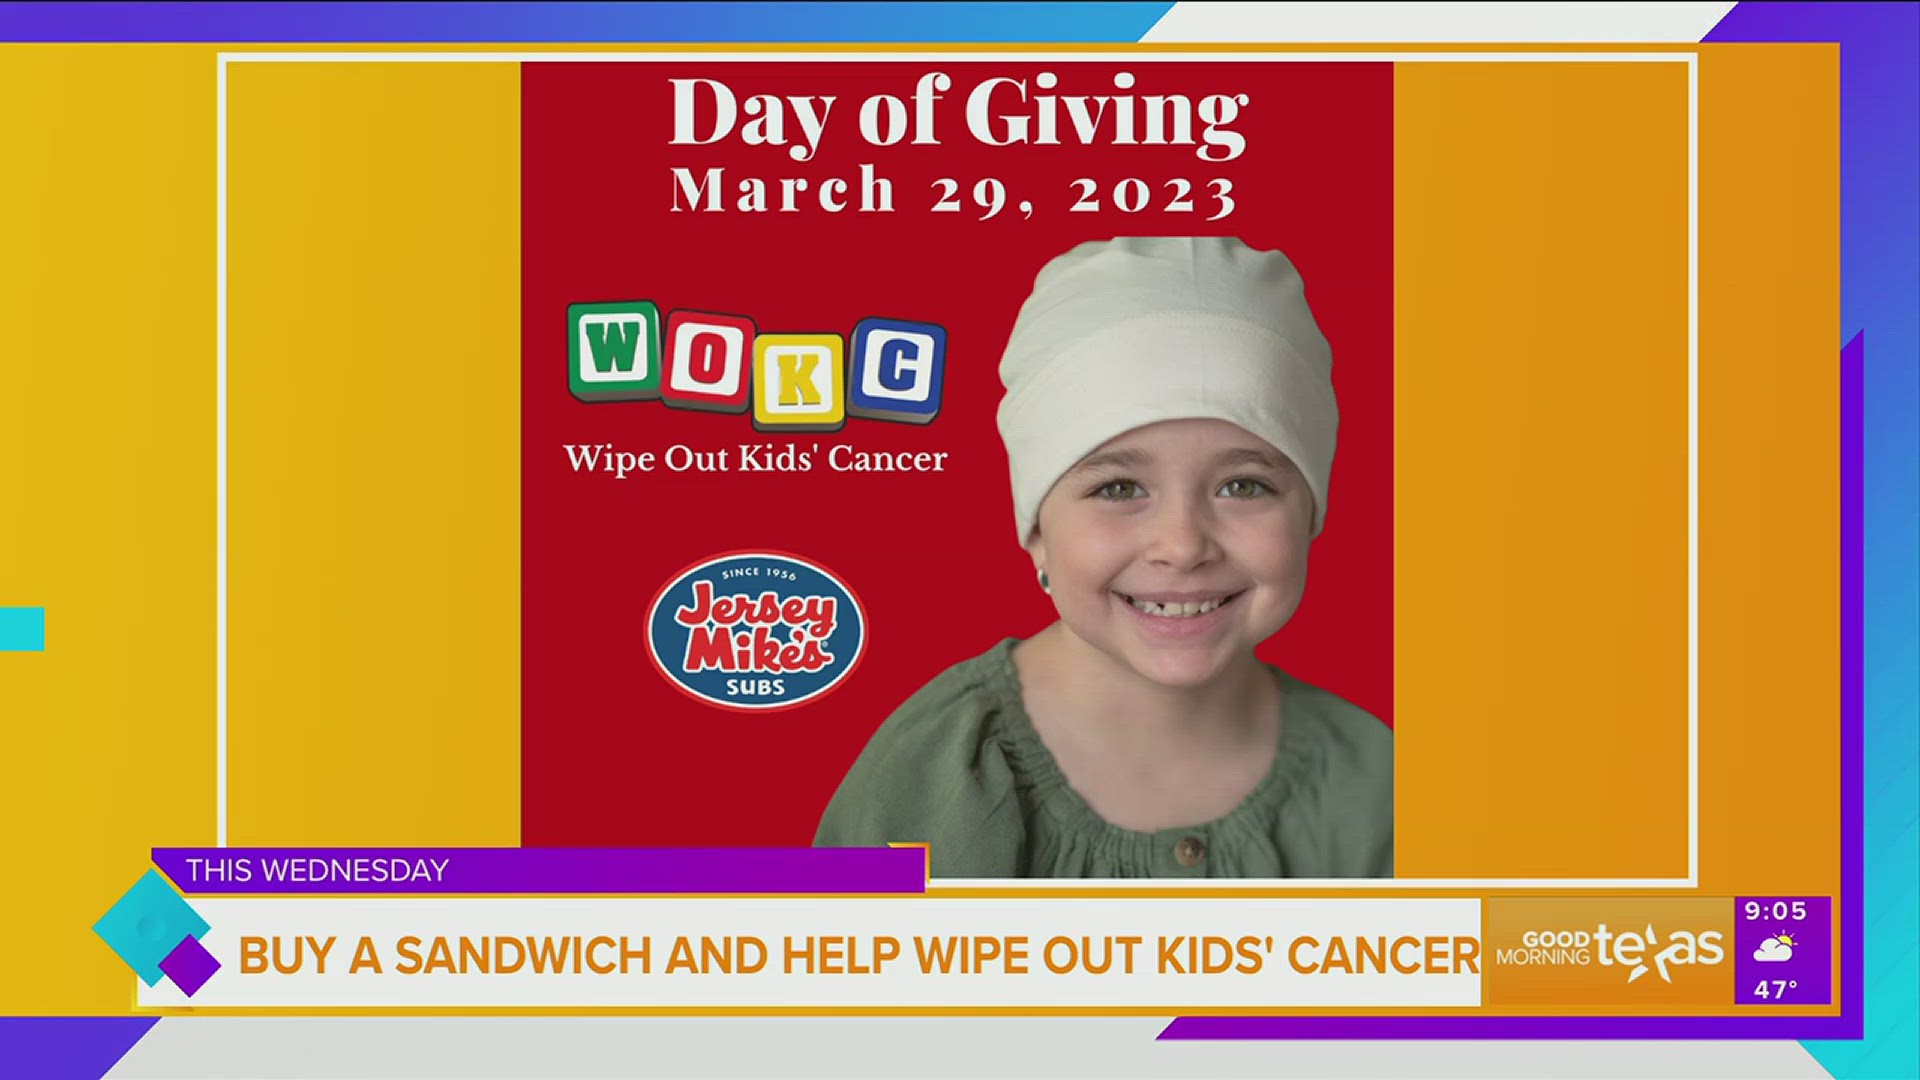 This week you can help raise funds for pediatric cancer research and all you have to do is buy a sandwich!